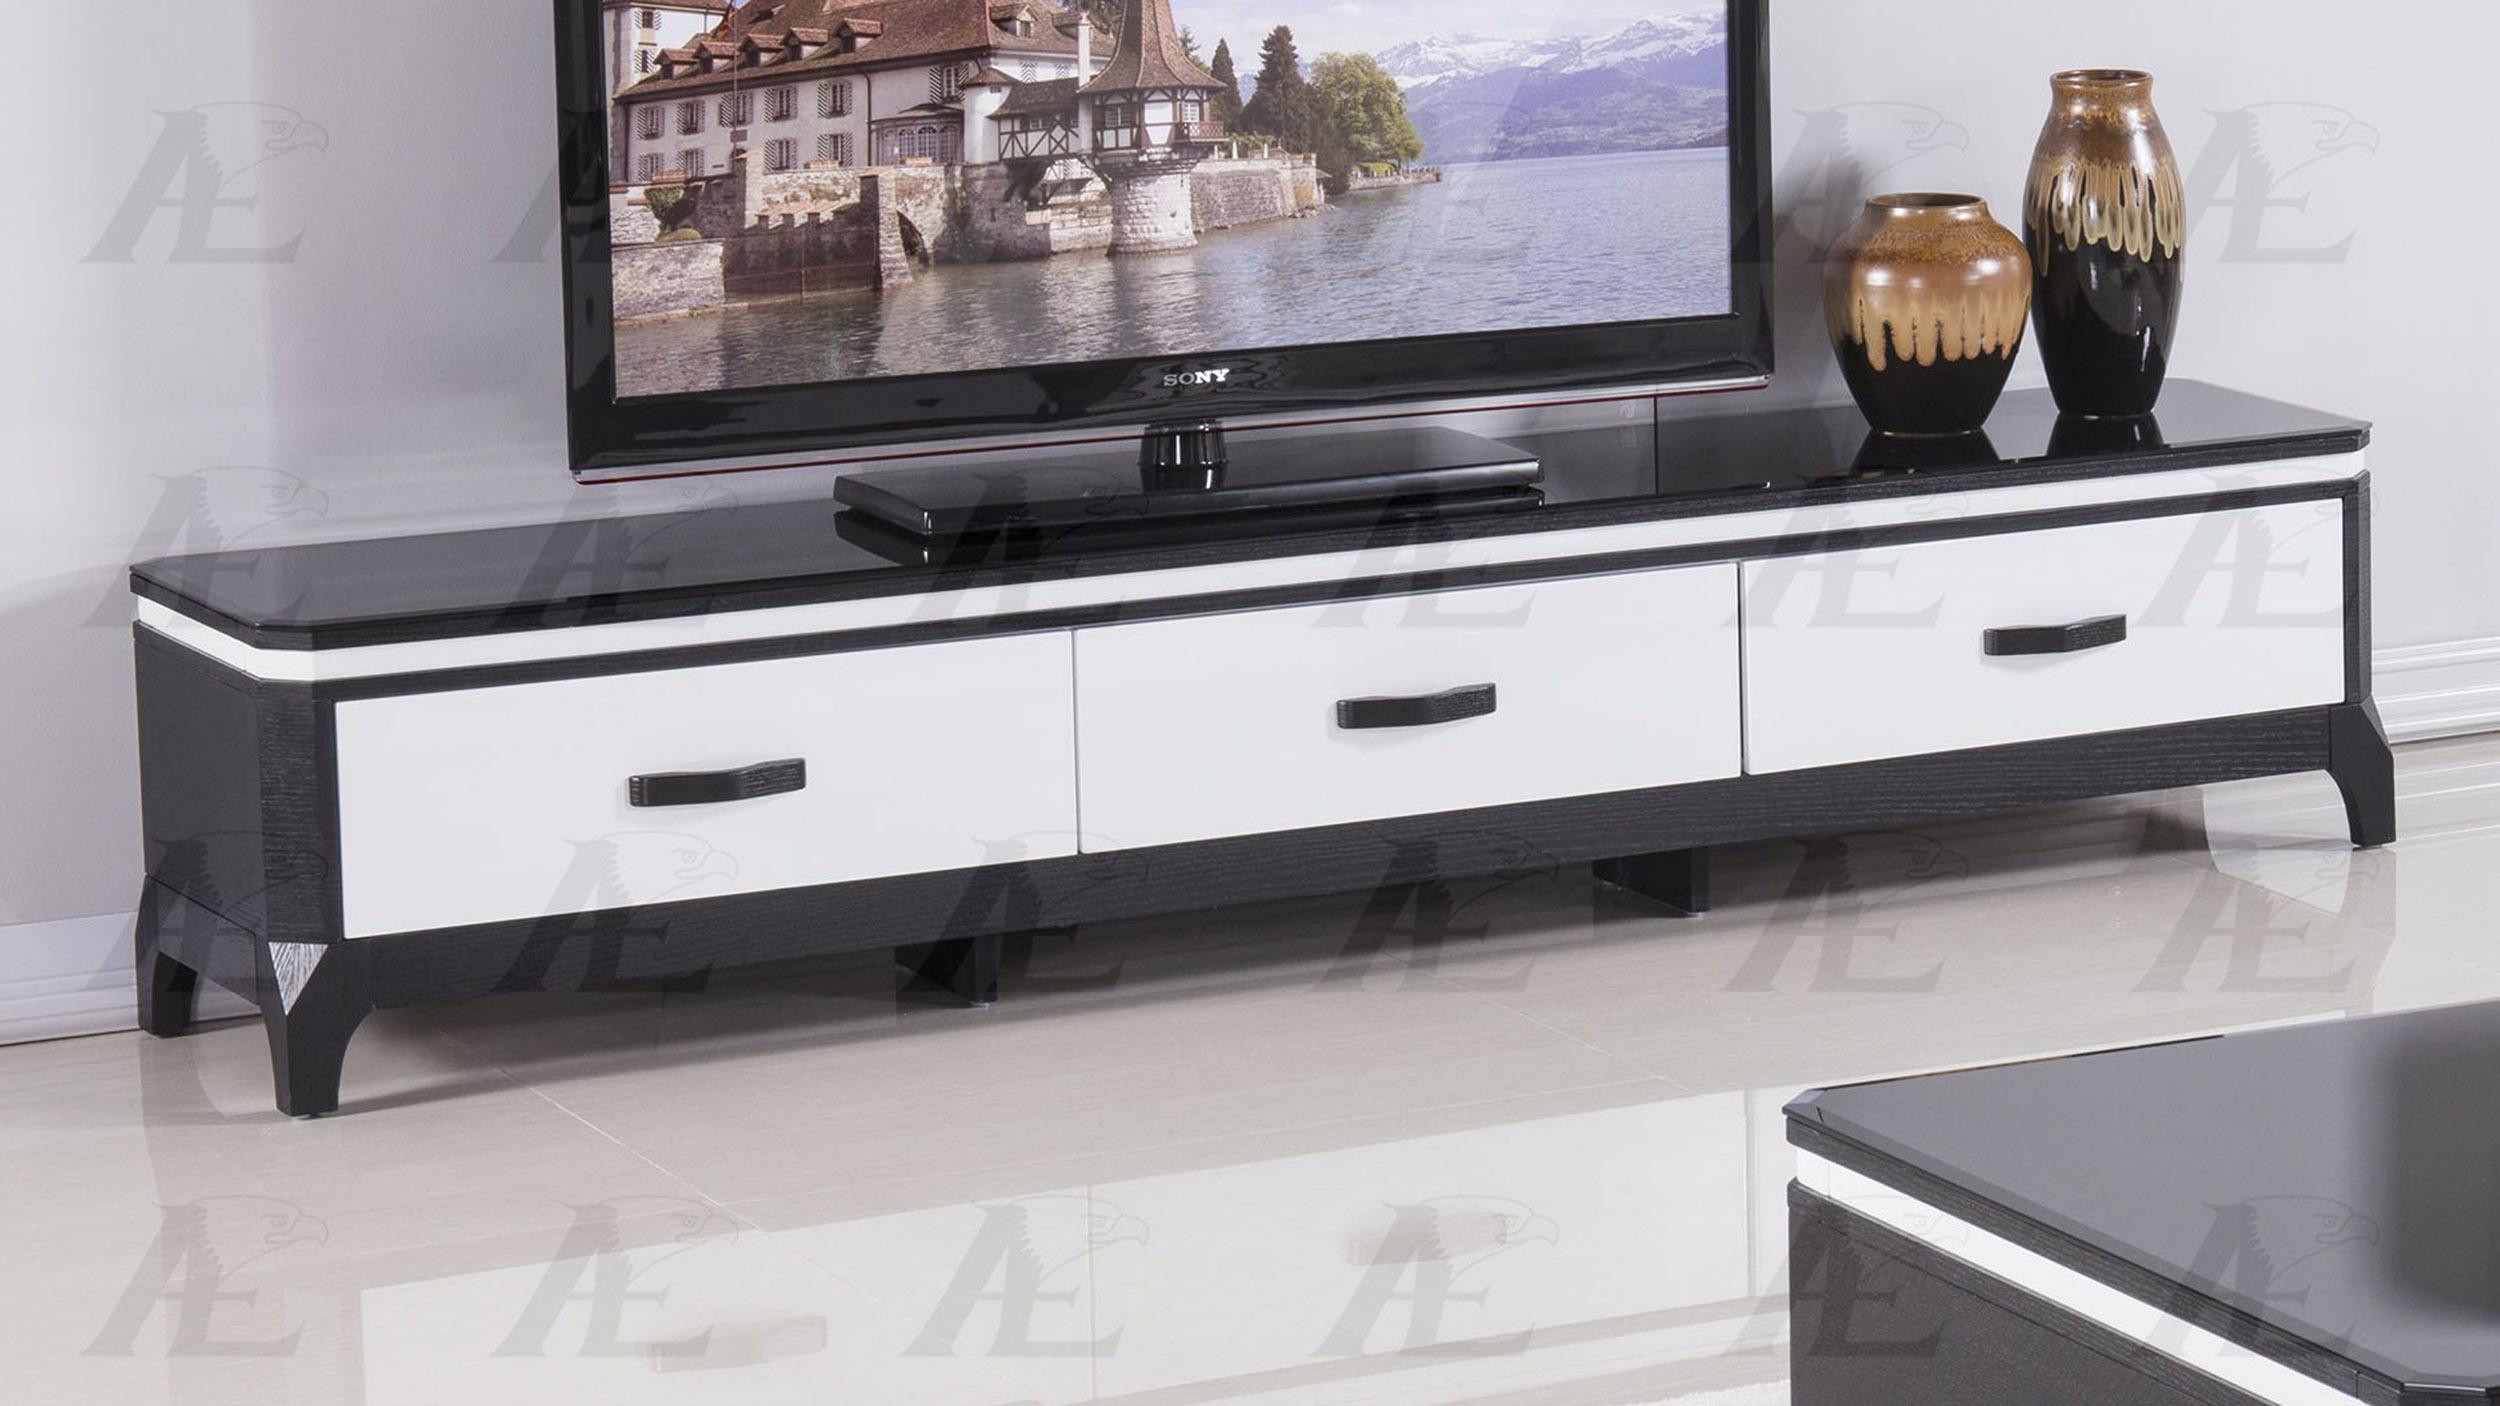 

    
American Eagle Furniture FC-C592 Black and White Tempered Glass Top  TV Stand
